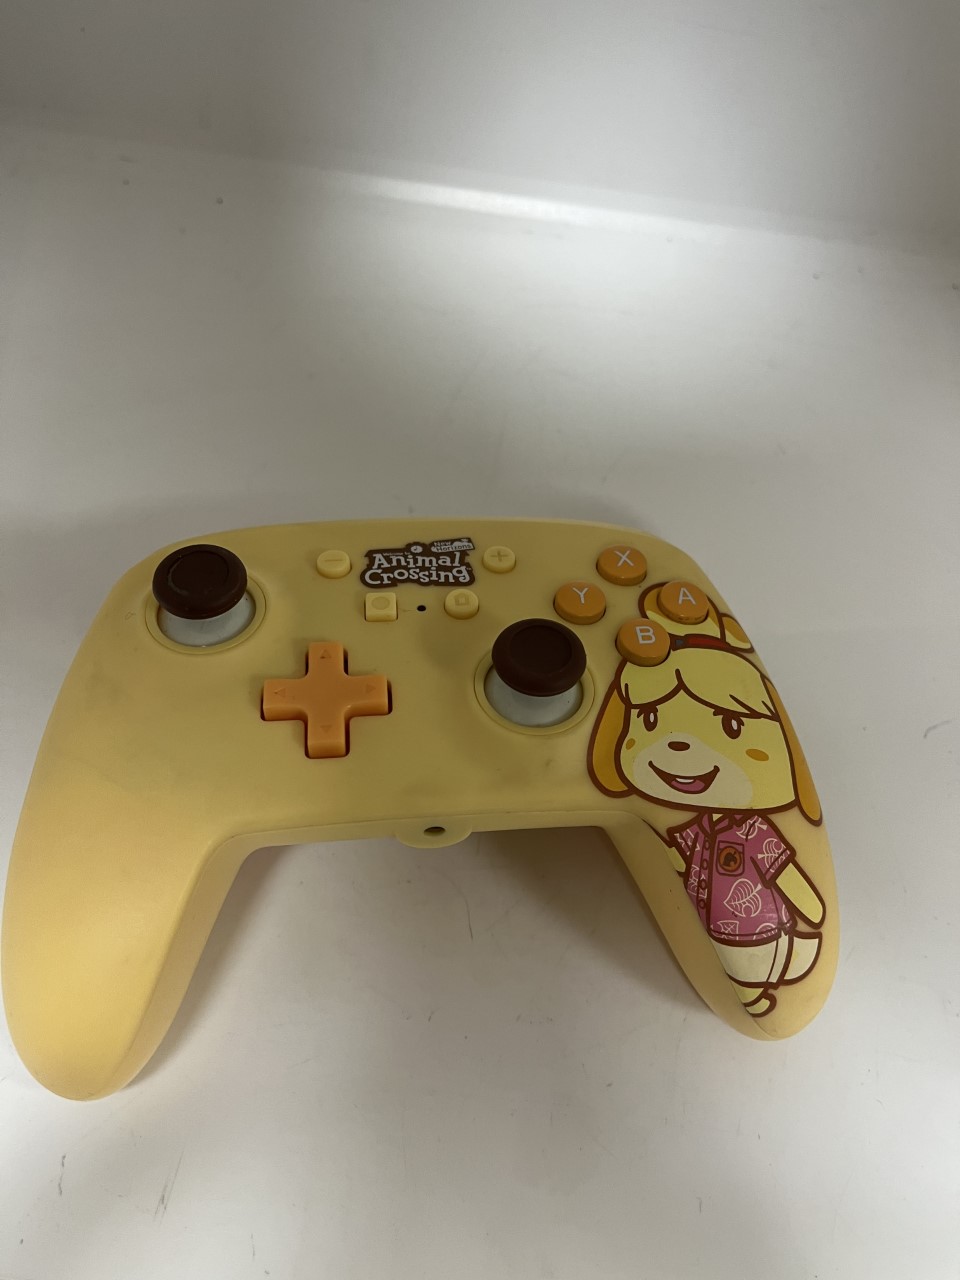 Nintendo Switch Animal Crossing Controller With Wire.